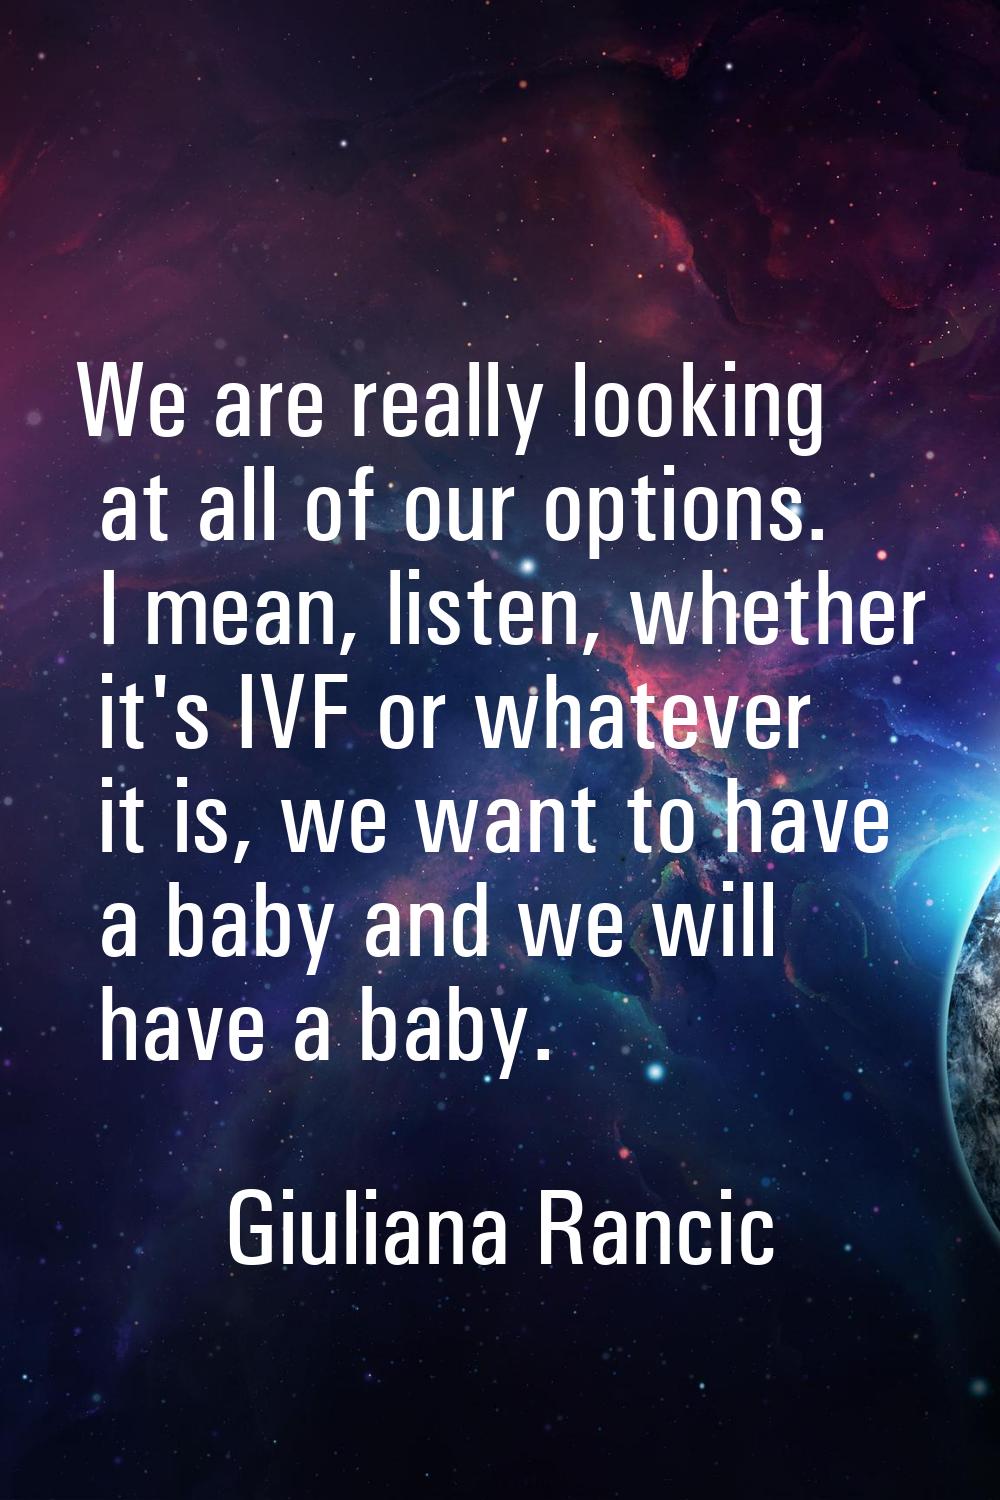 We are really looking at all of our options. I mean, listen, whether it's IVF or whatever it is, we